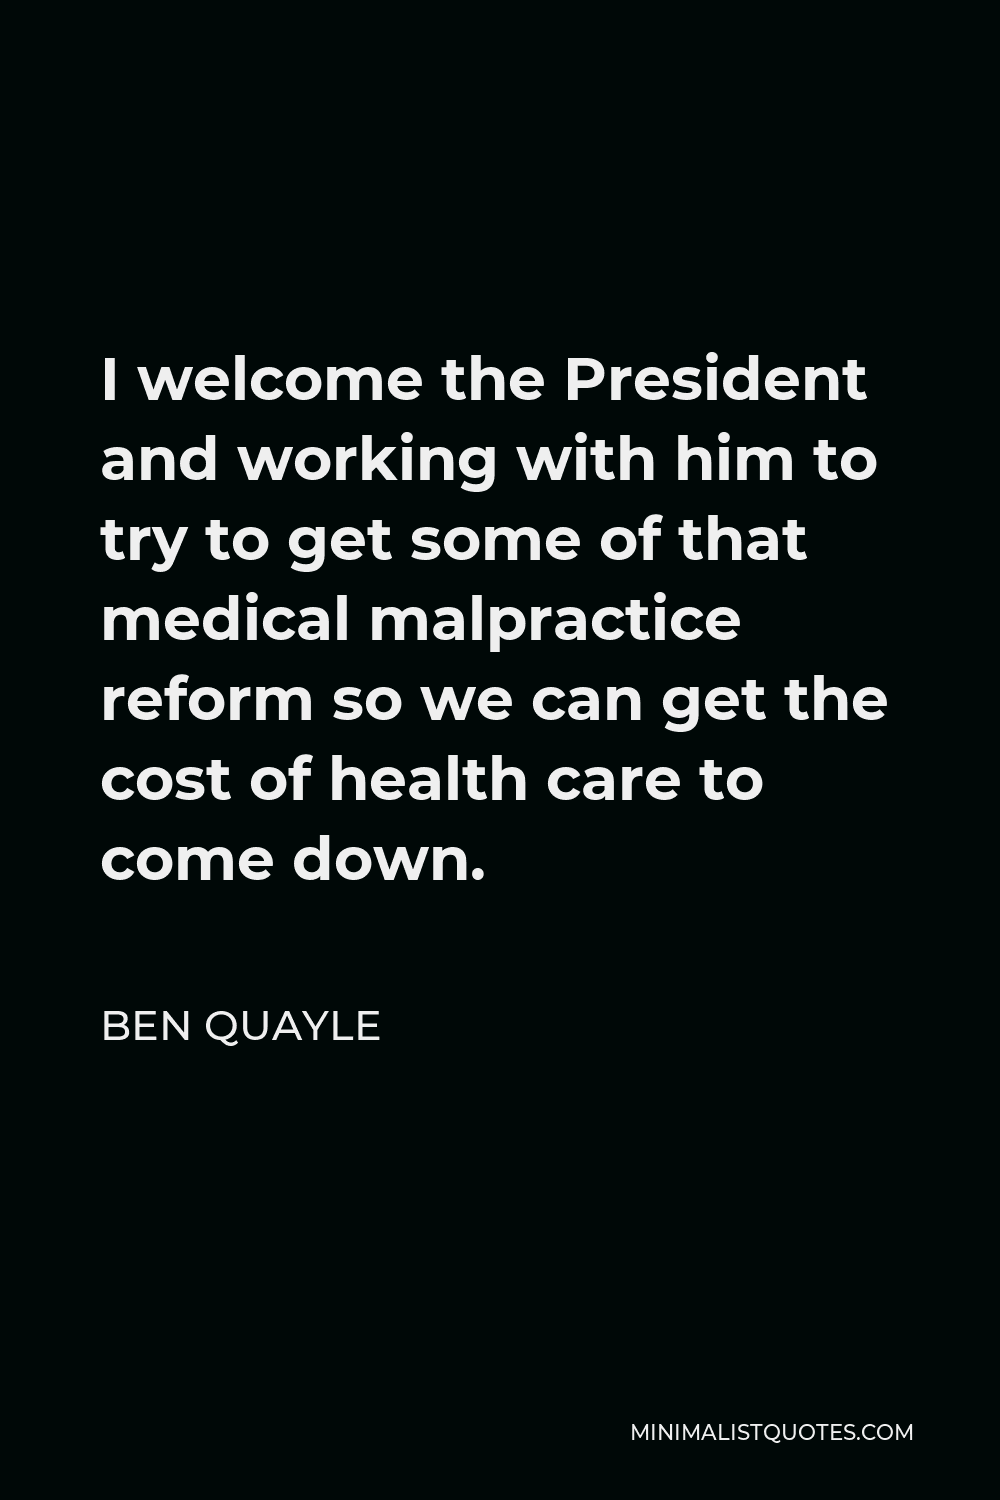 Ben Quayle Quote - I welcome the President and working with him to try to get some of that medical malpractice reform so we can get the cost of health care to come down.